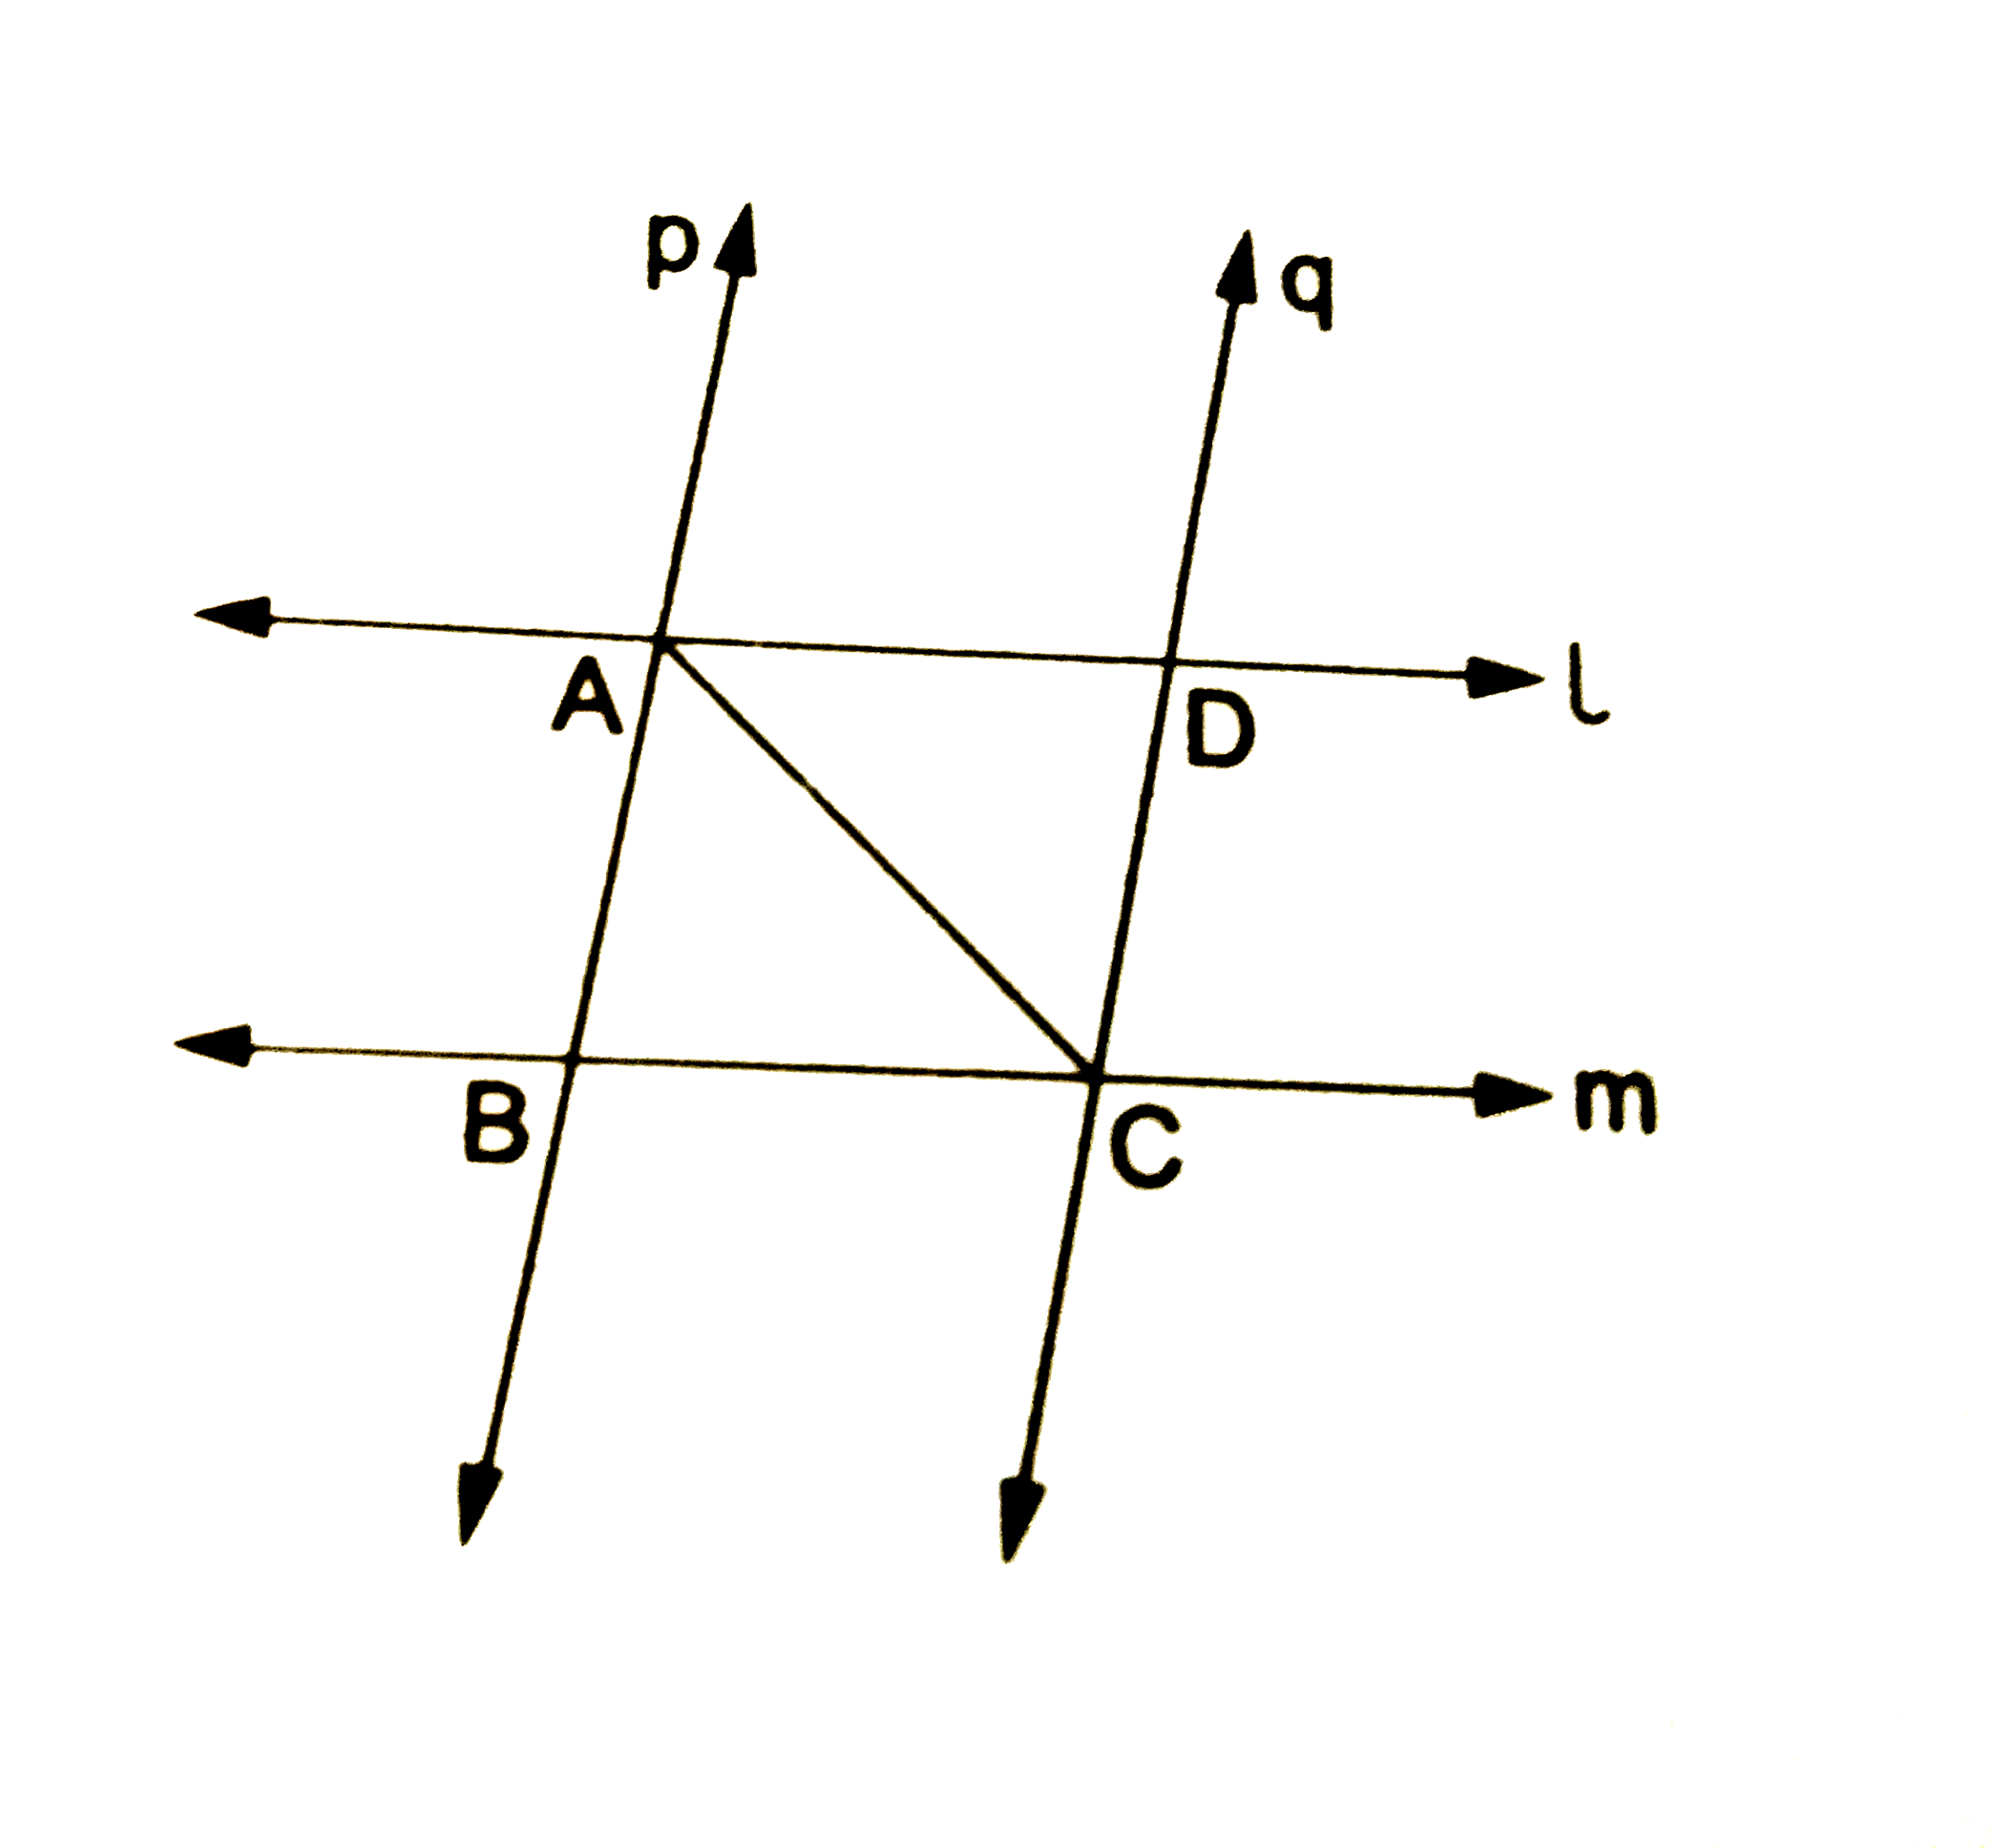 In thg given figure, two parallel lines l and m are intersected by two parallel lines p and q.   Show that DeltaABC~=DeltaCDA.